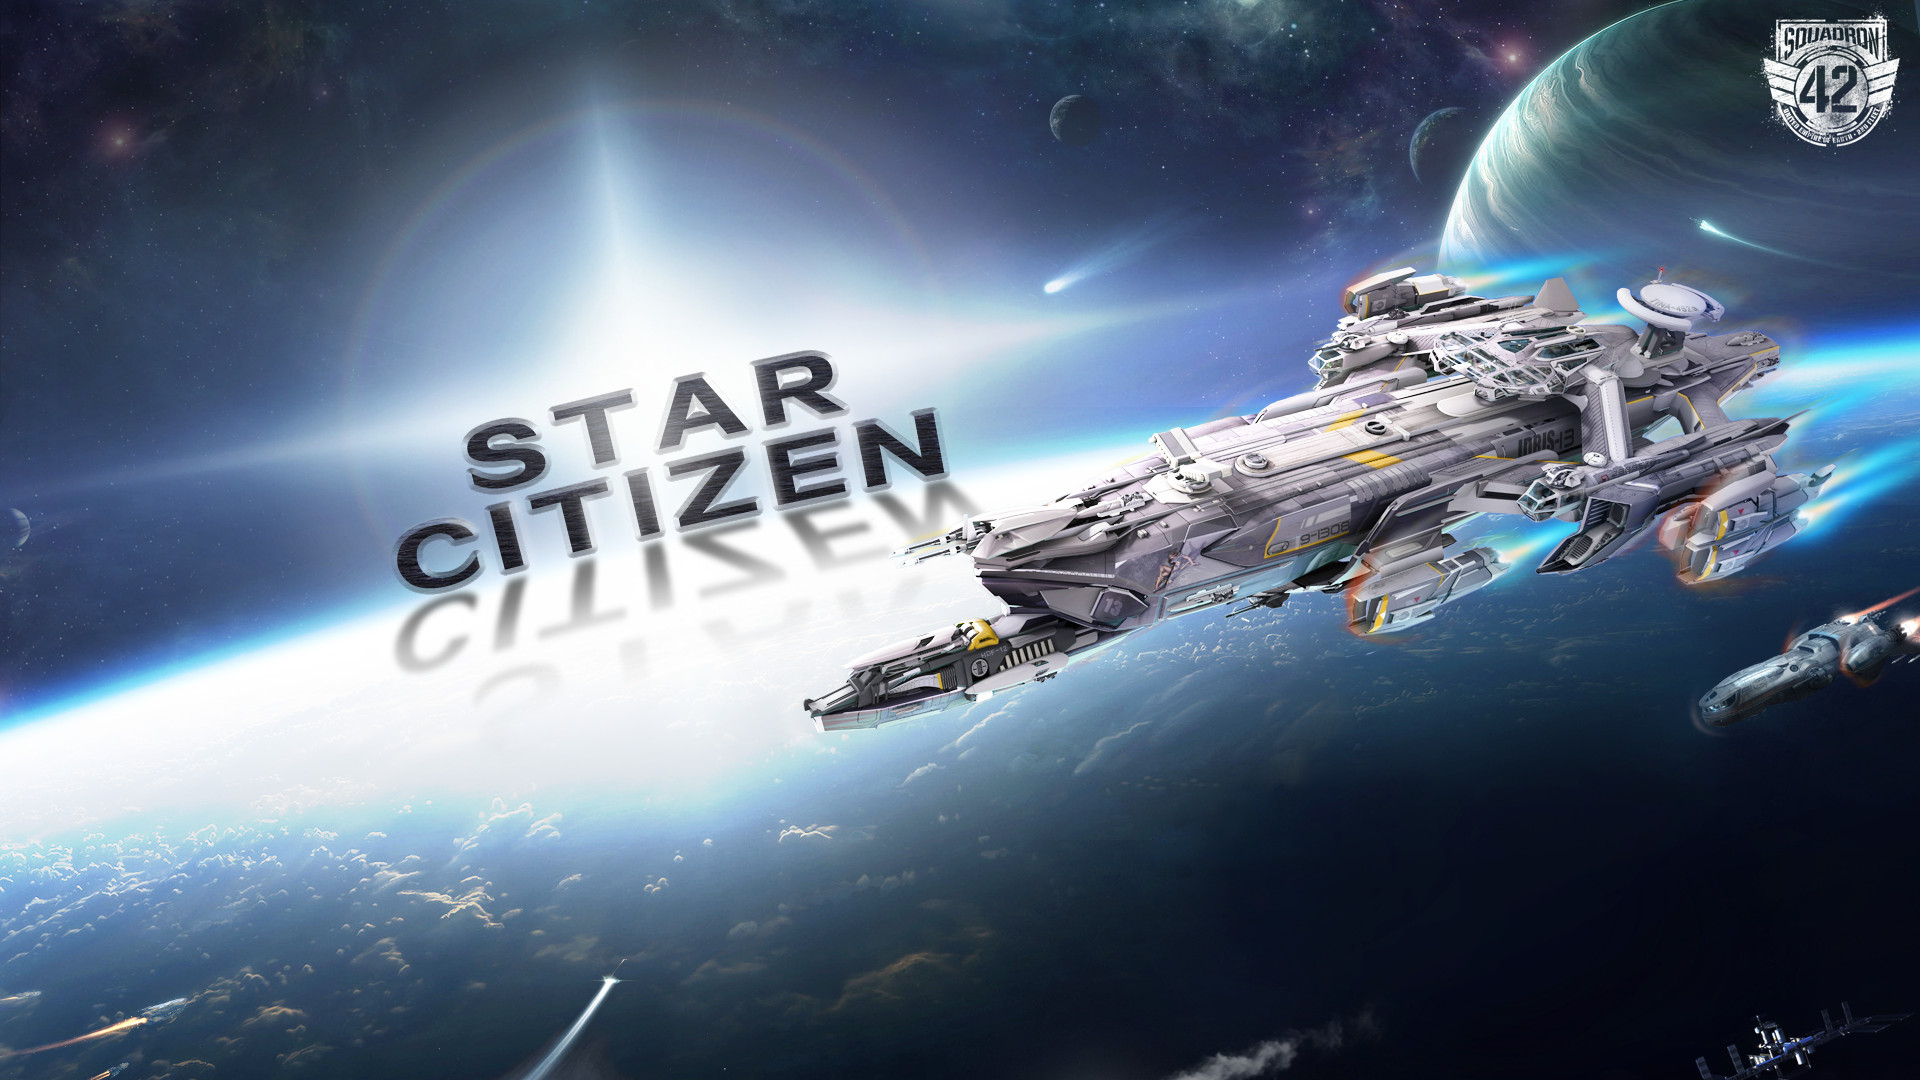 image of star citizen